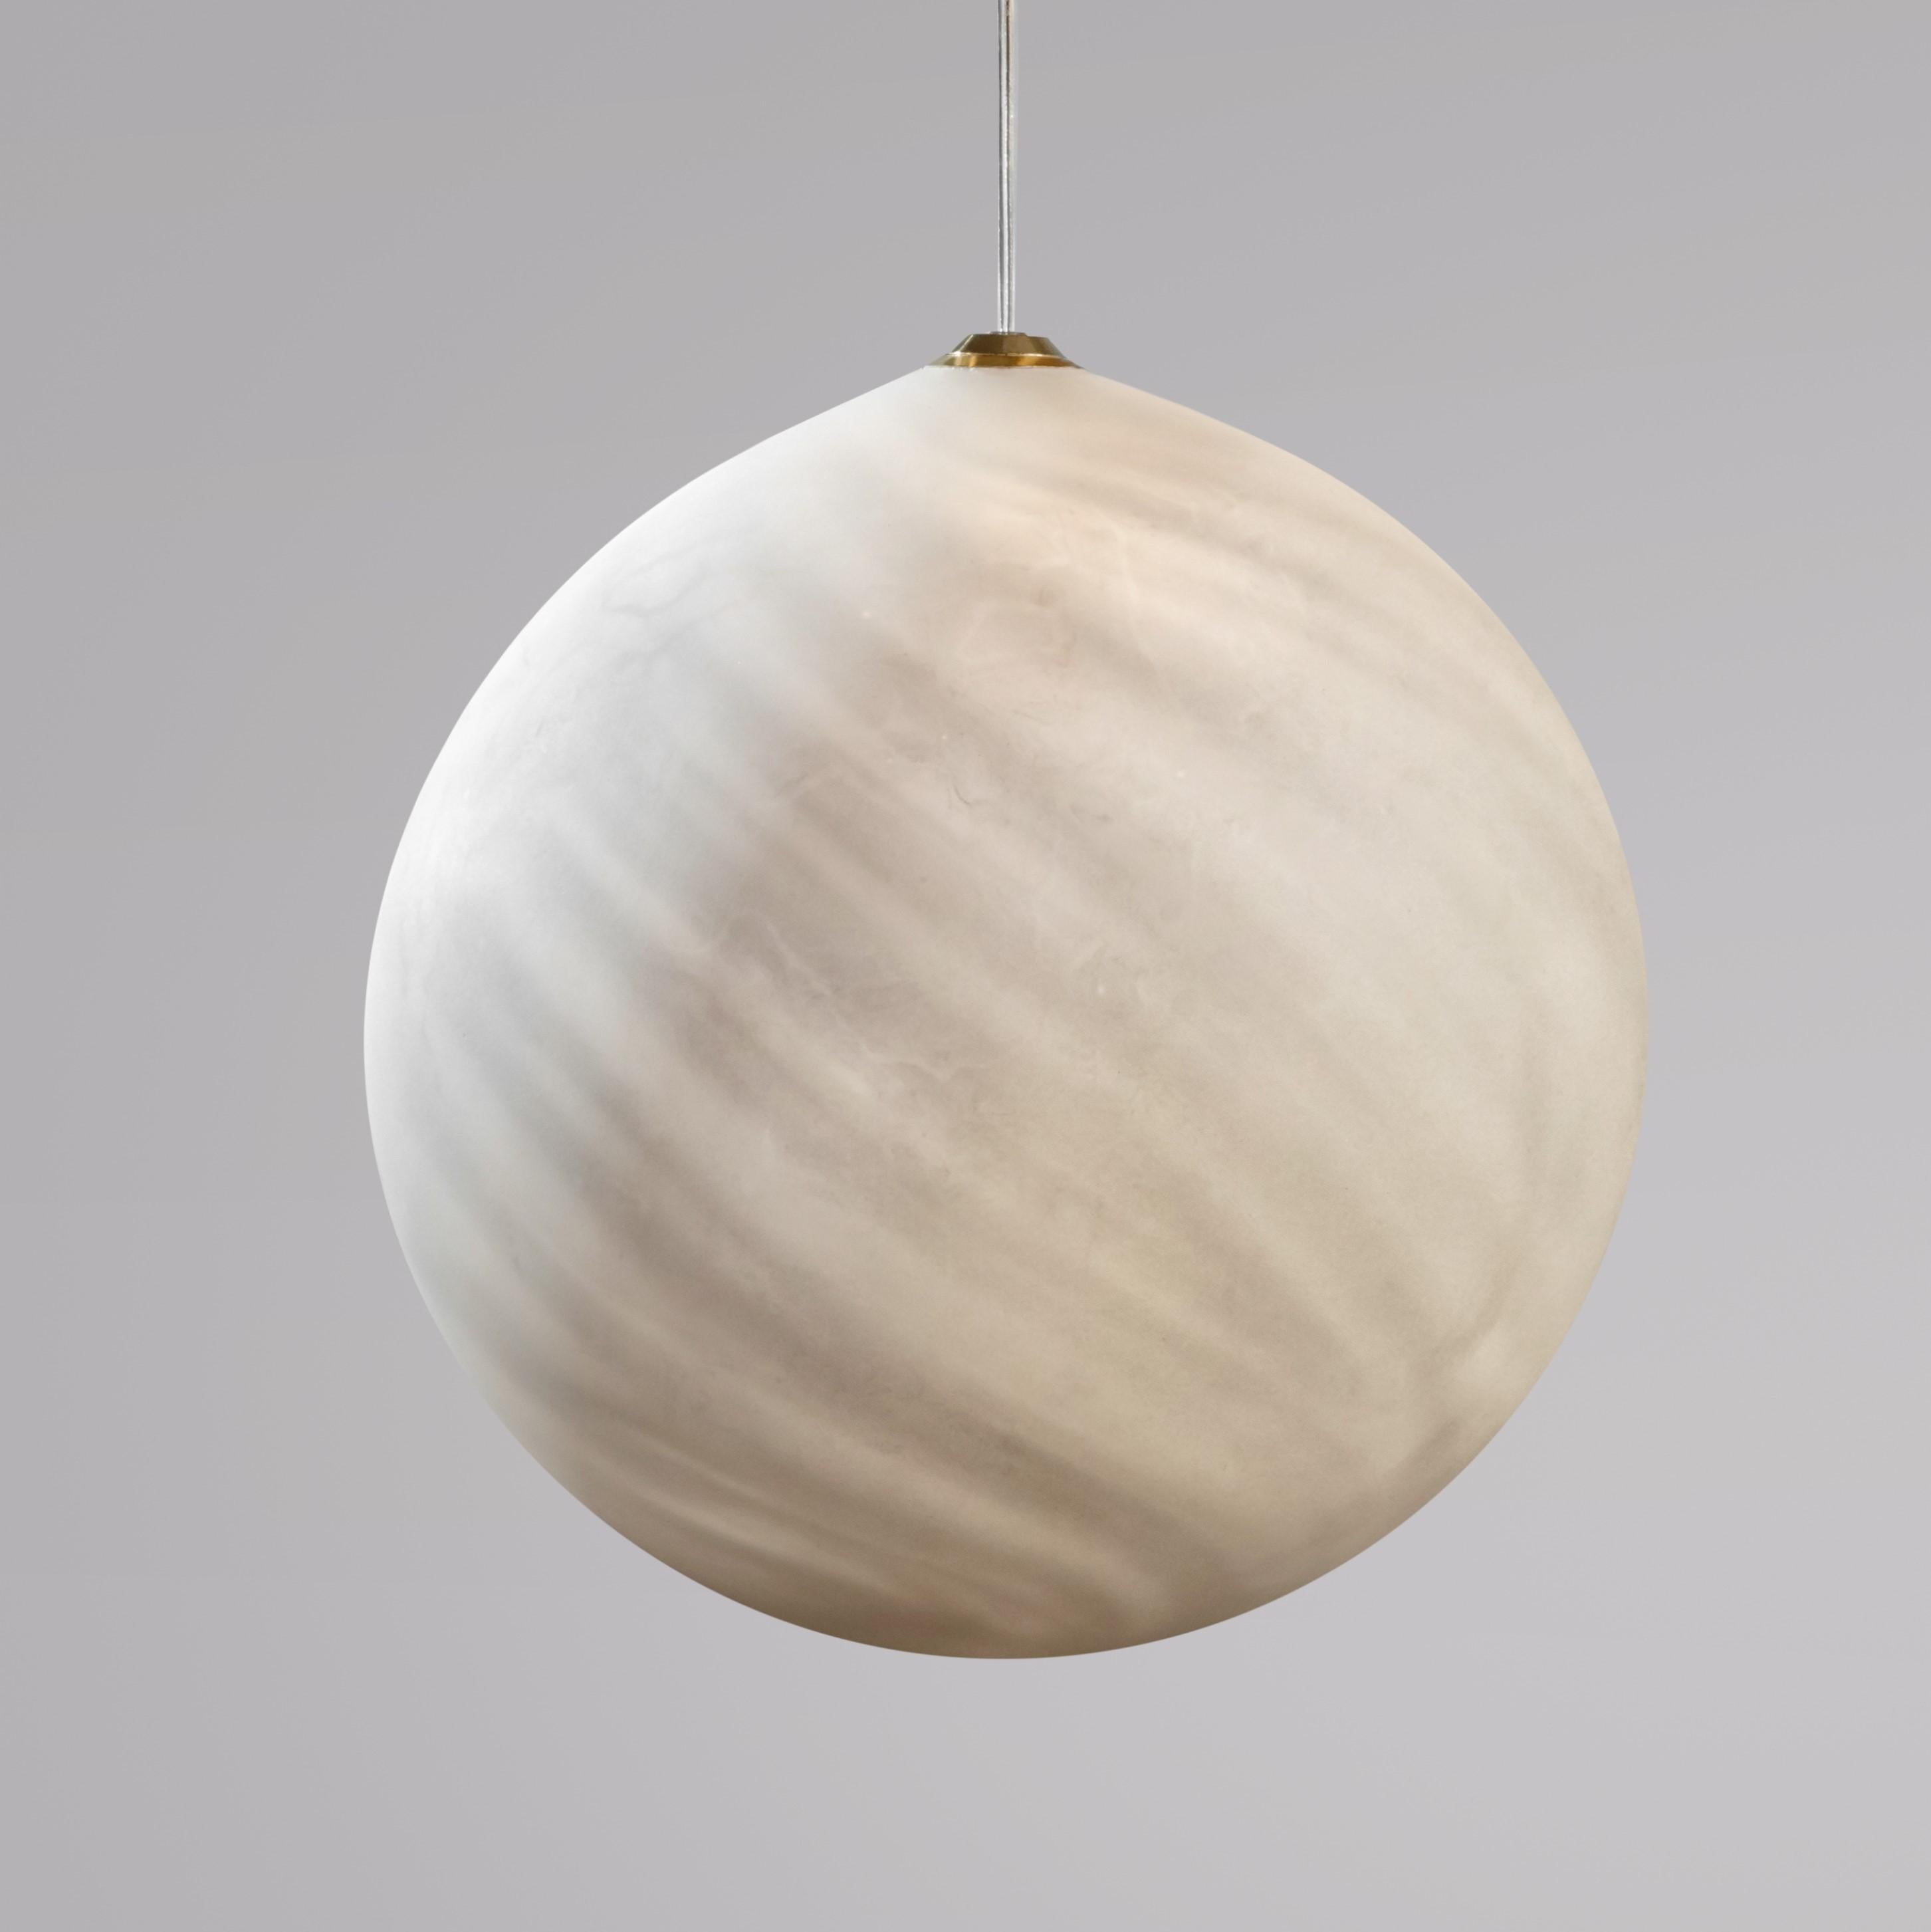 Saturne Hanging Lights Planets, Ludovic Clément D’armont In New Condition For Sale In Geneve, CH